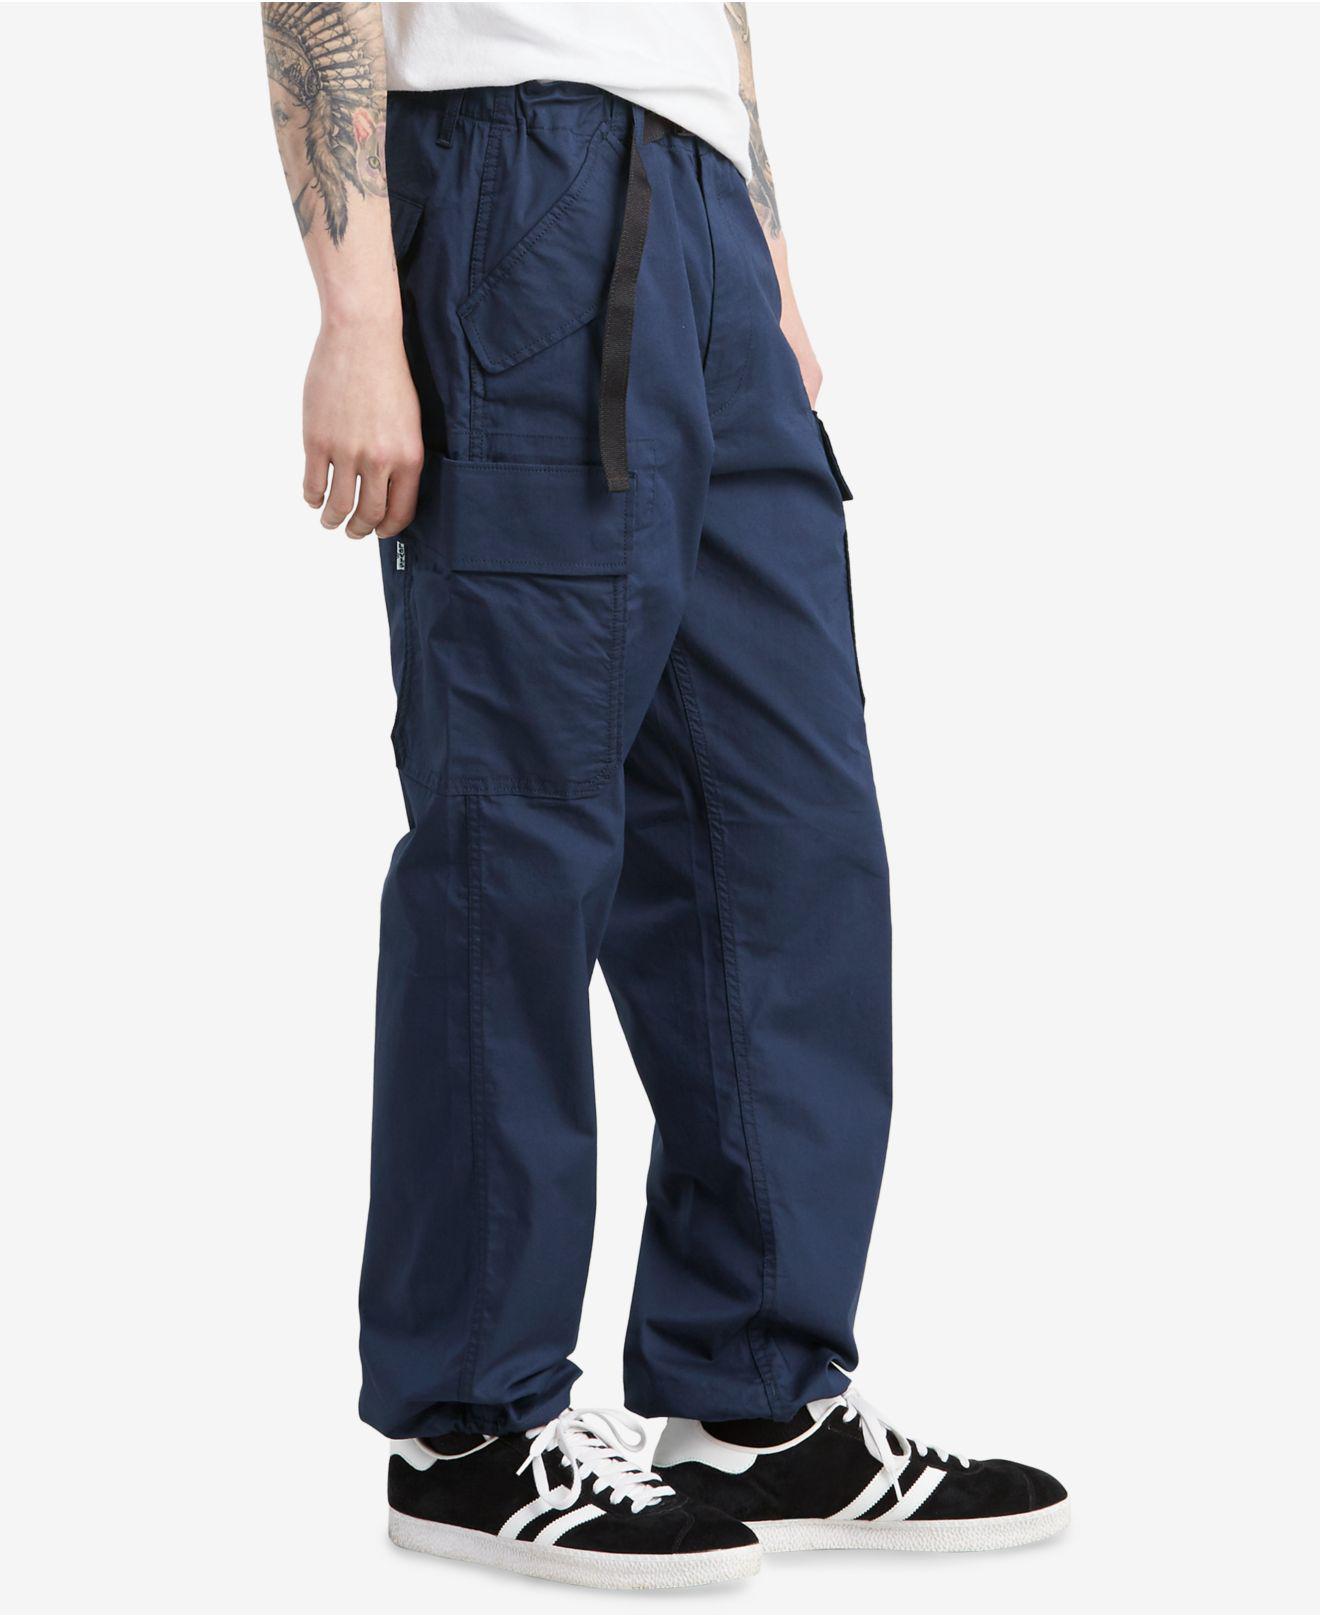 levi's carrier cargo pants Cheaper Than 